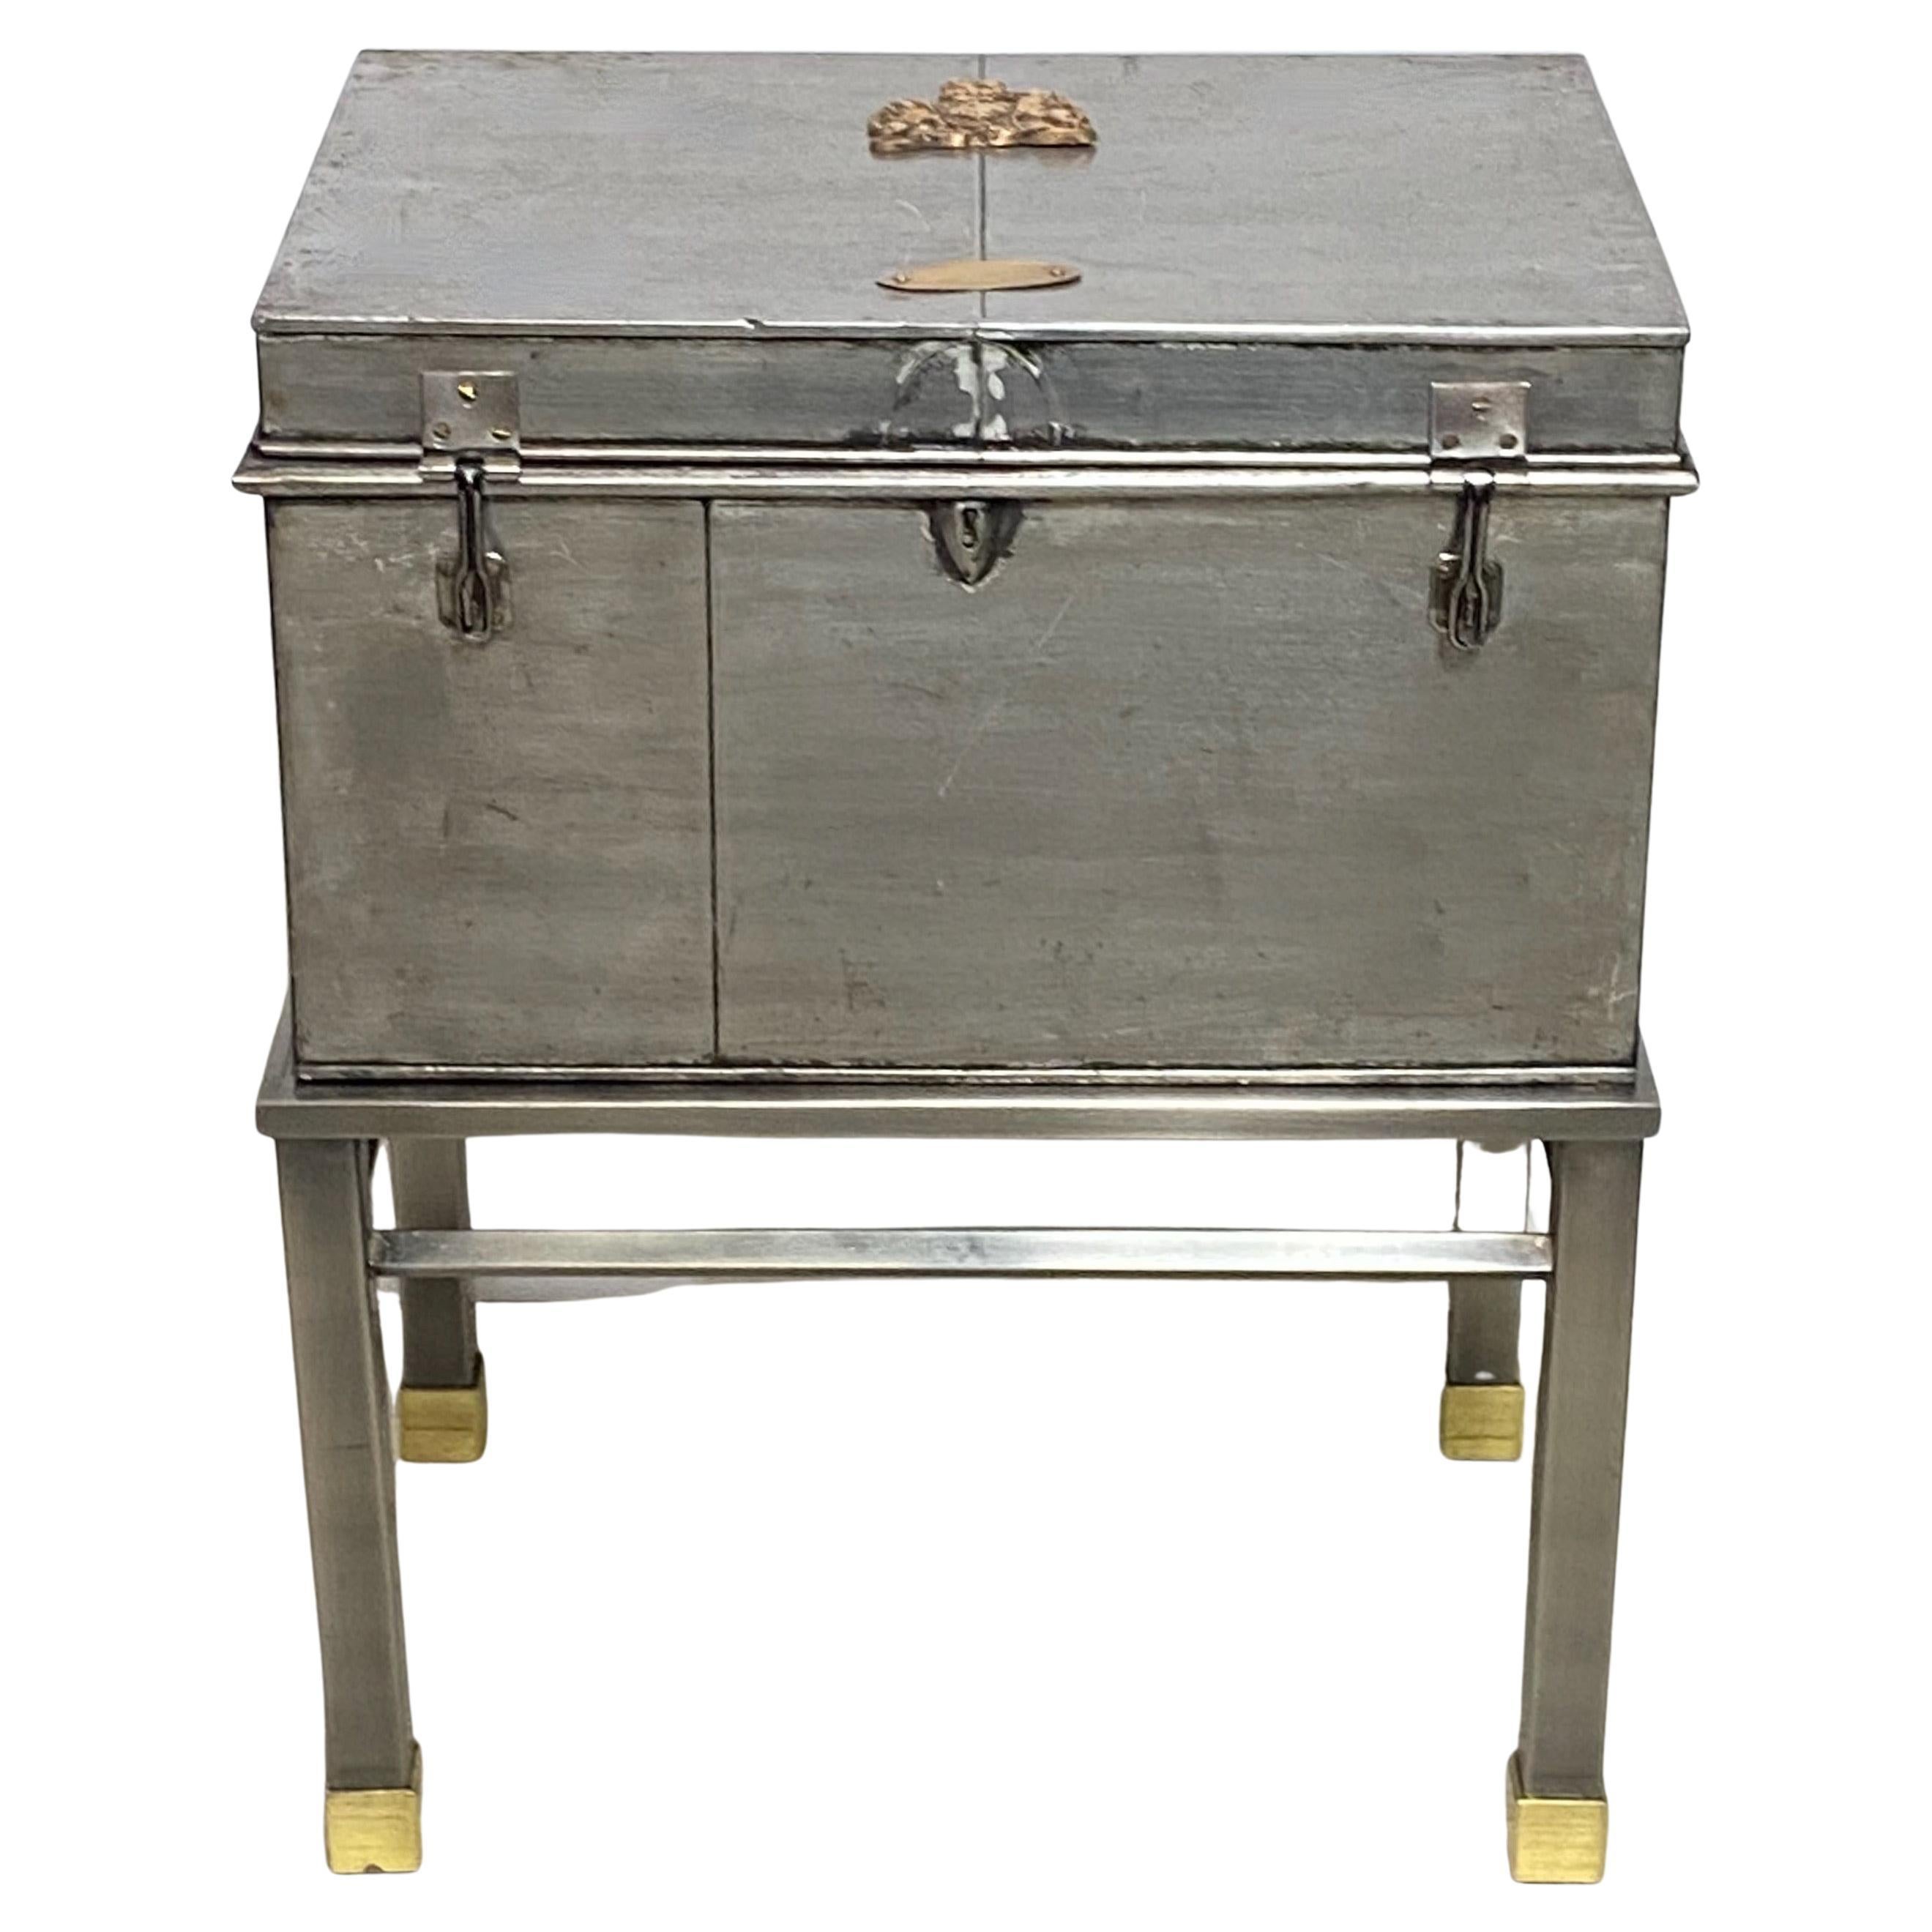 Burnished Steel and Brass Box on Stand, England 19th Century For Sale